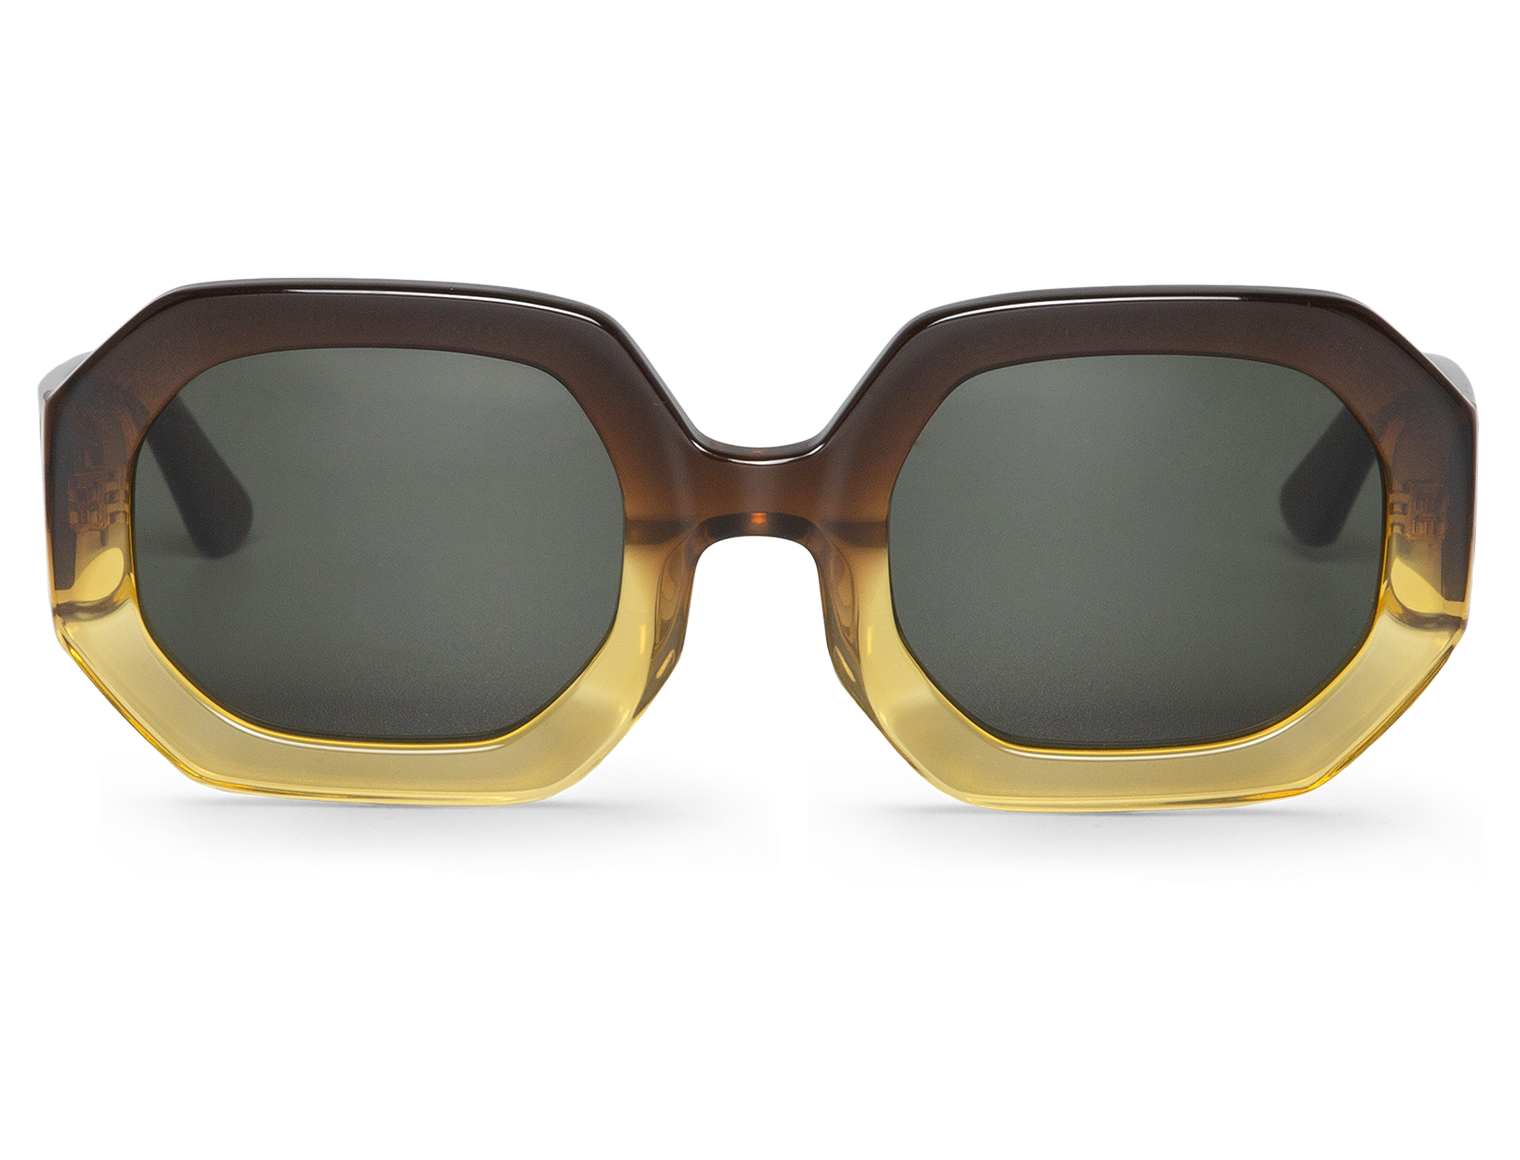 Sagene Hive with Classical Lenses Sunglasses